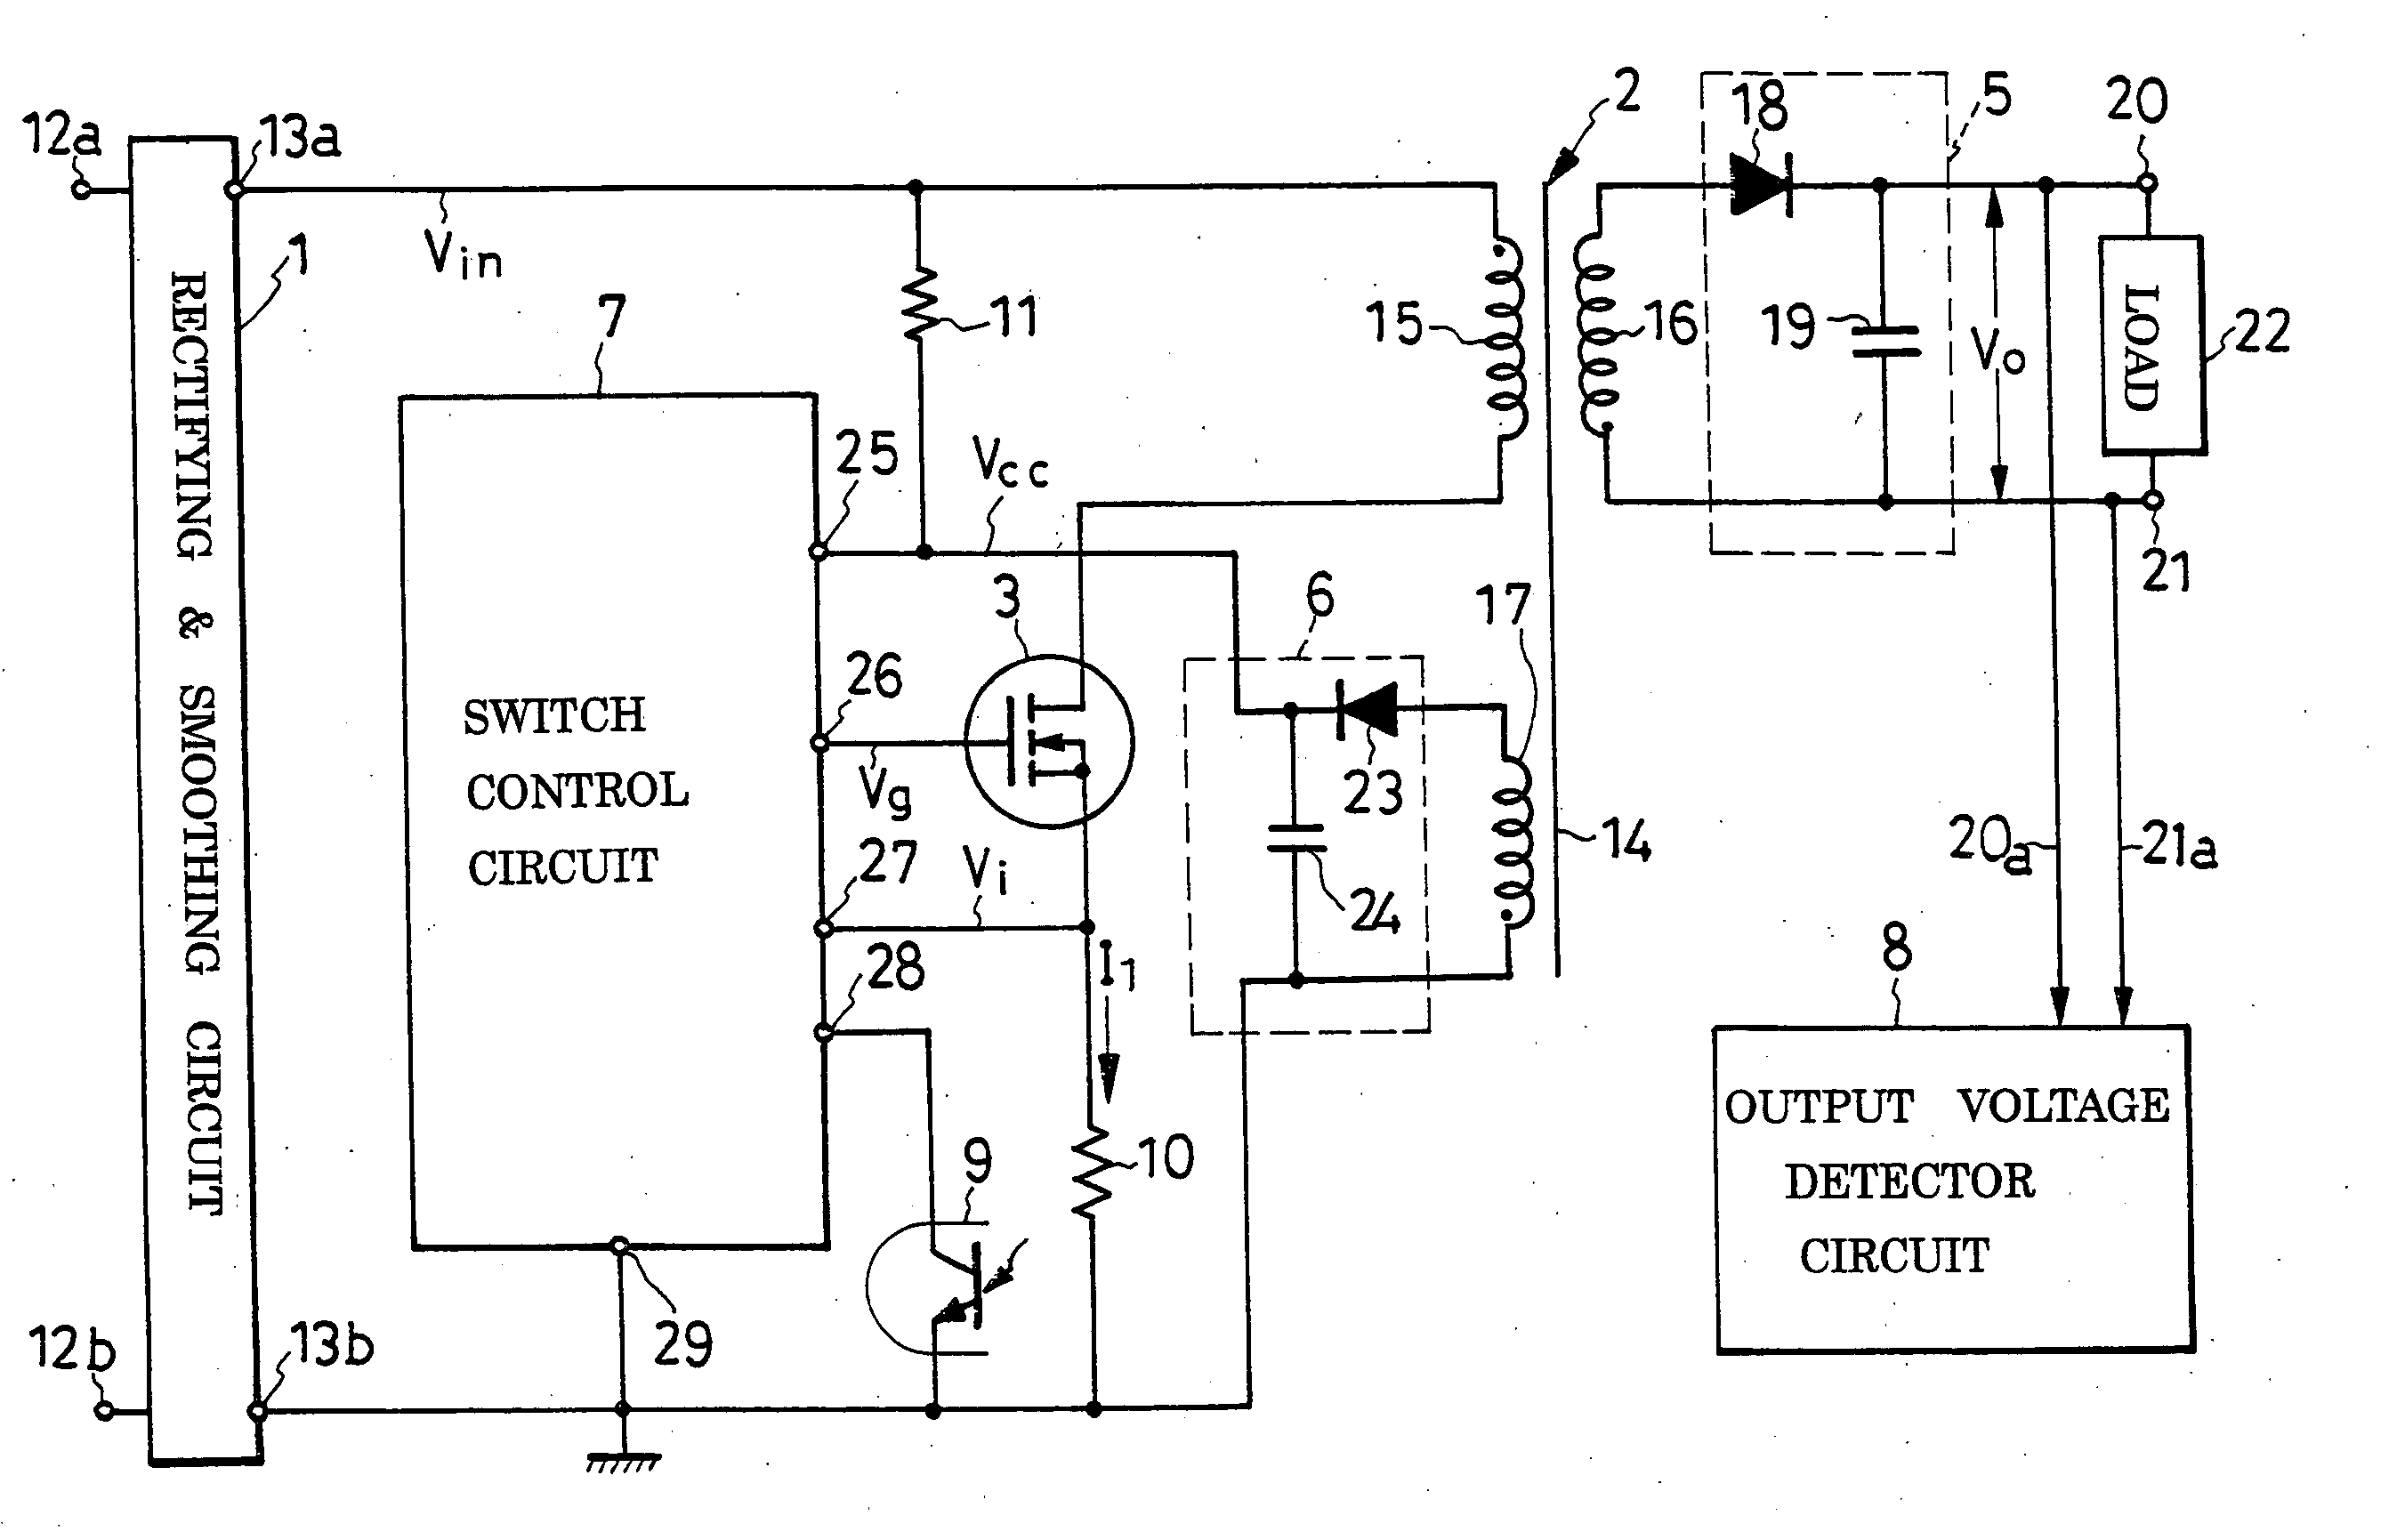 Switching dc power supply